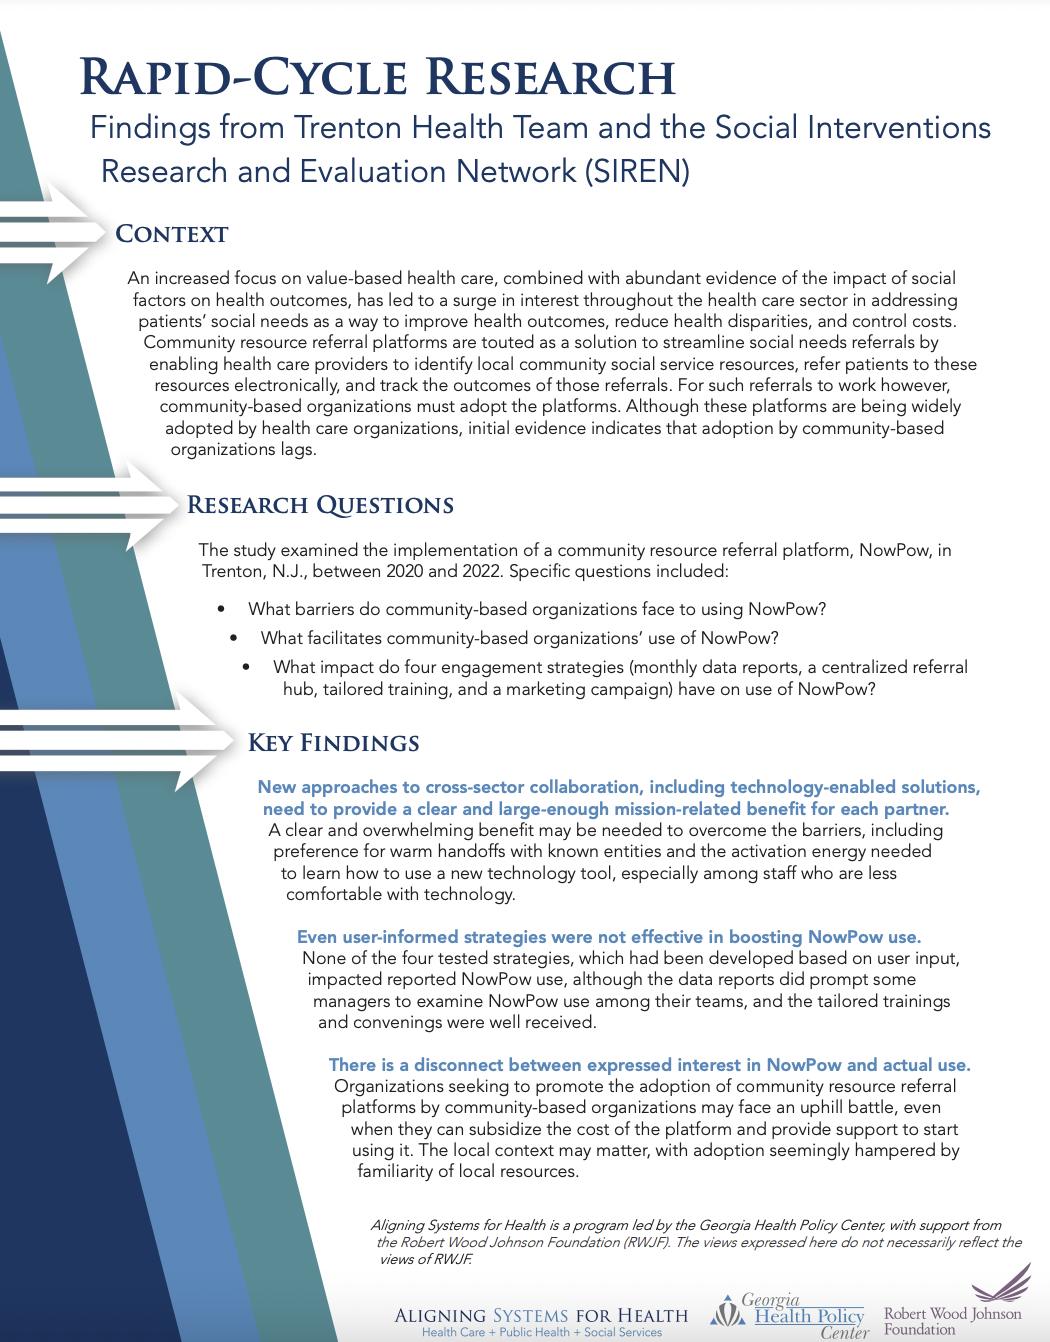 Findings from Trenton Health Team and the Social Interventions Research and Evaluation Network (SIREN)